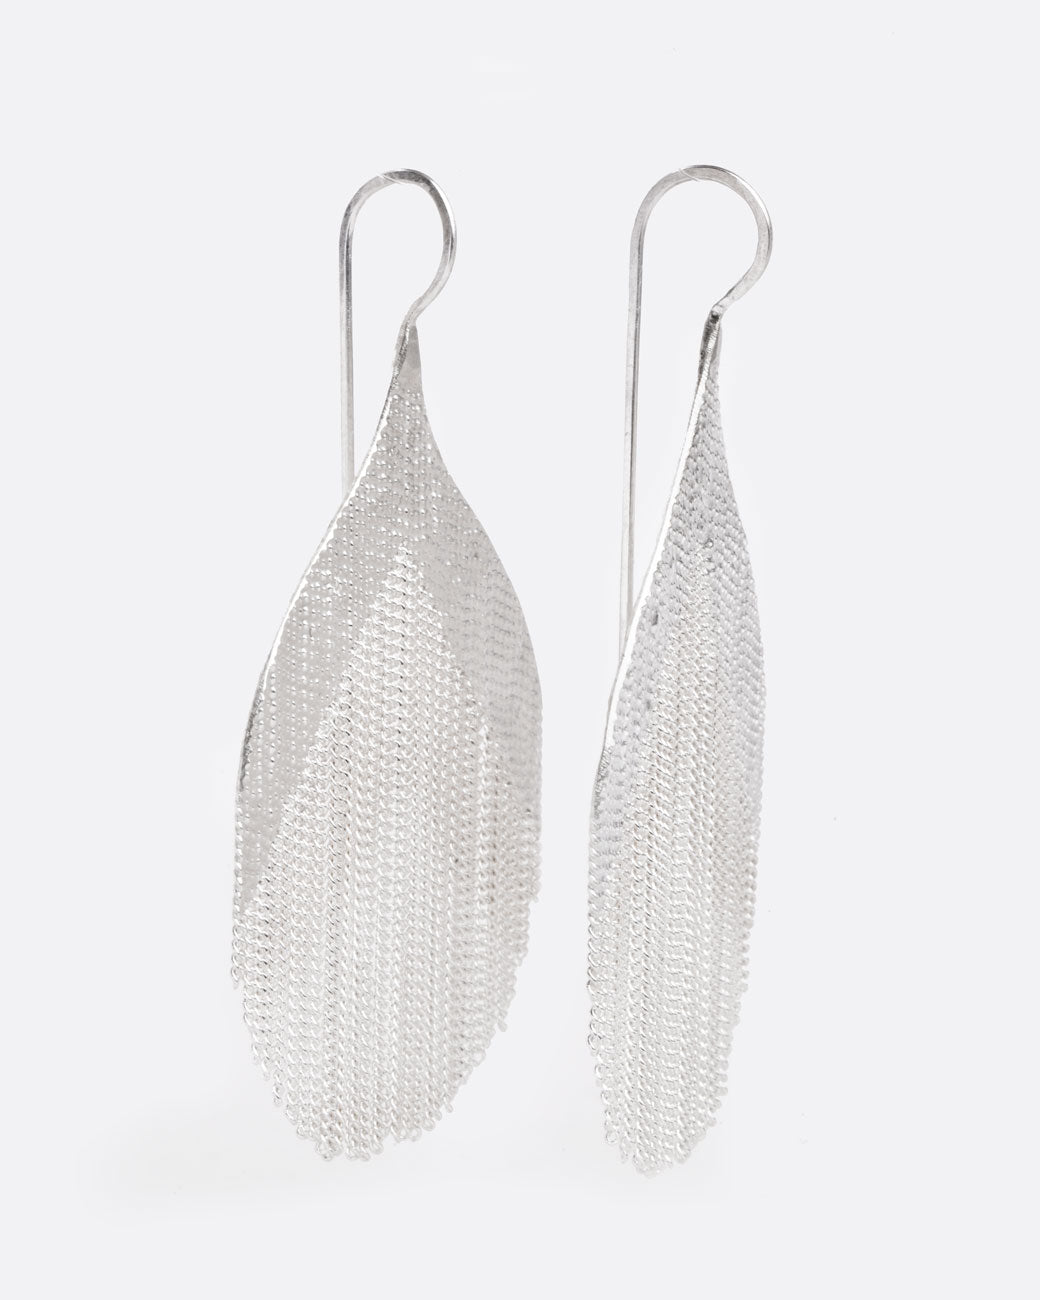 whale tail shaped earrings with a number of dangling chains in the middle